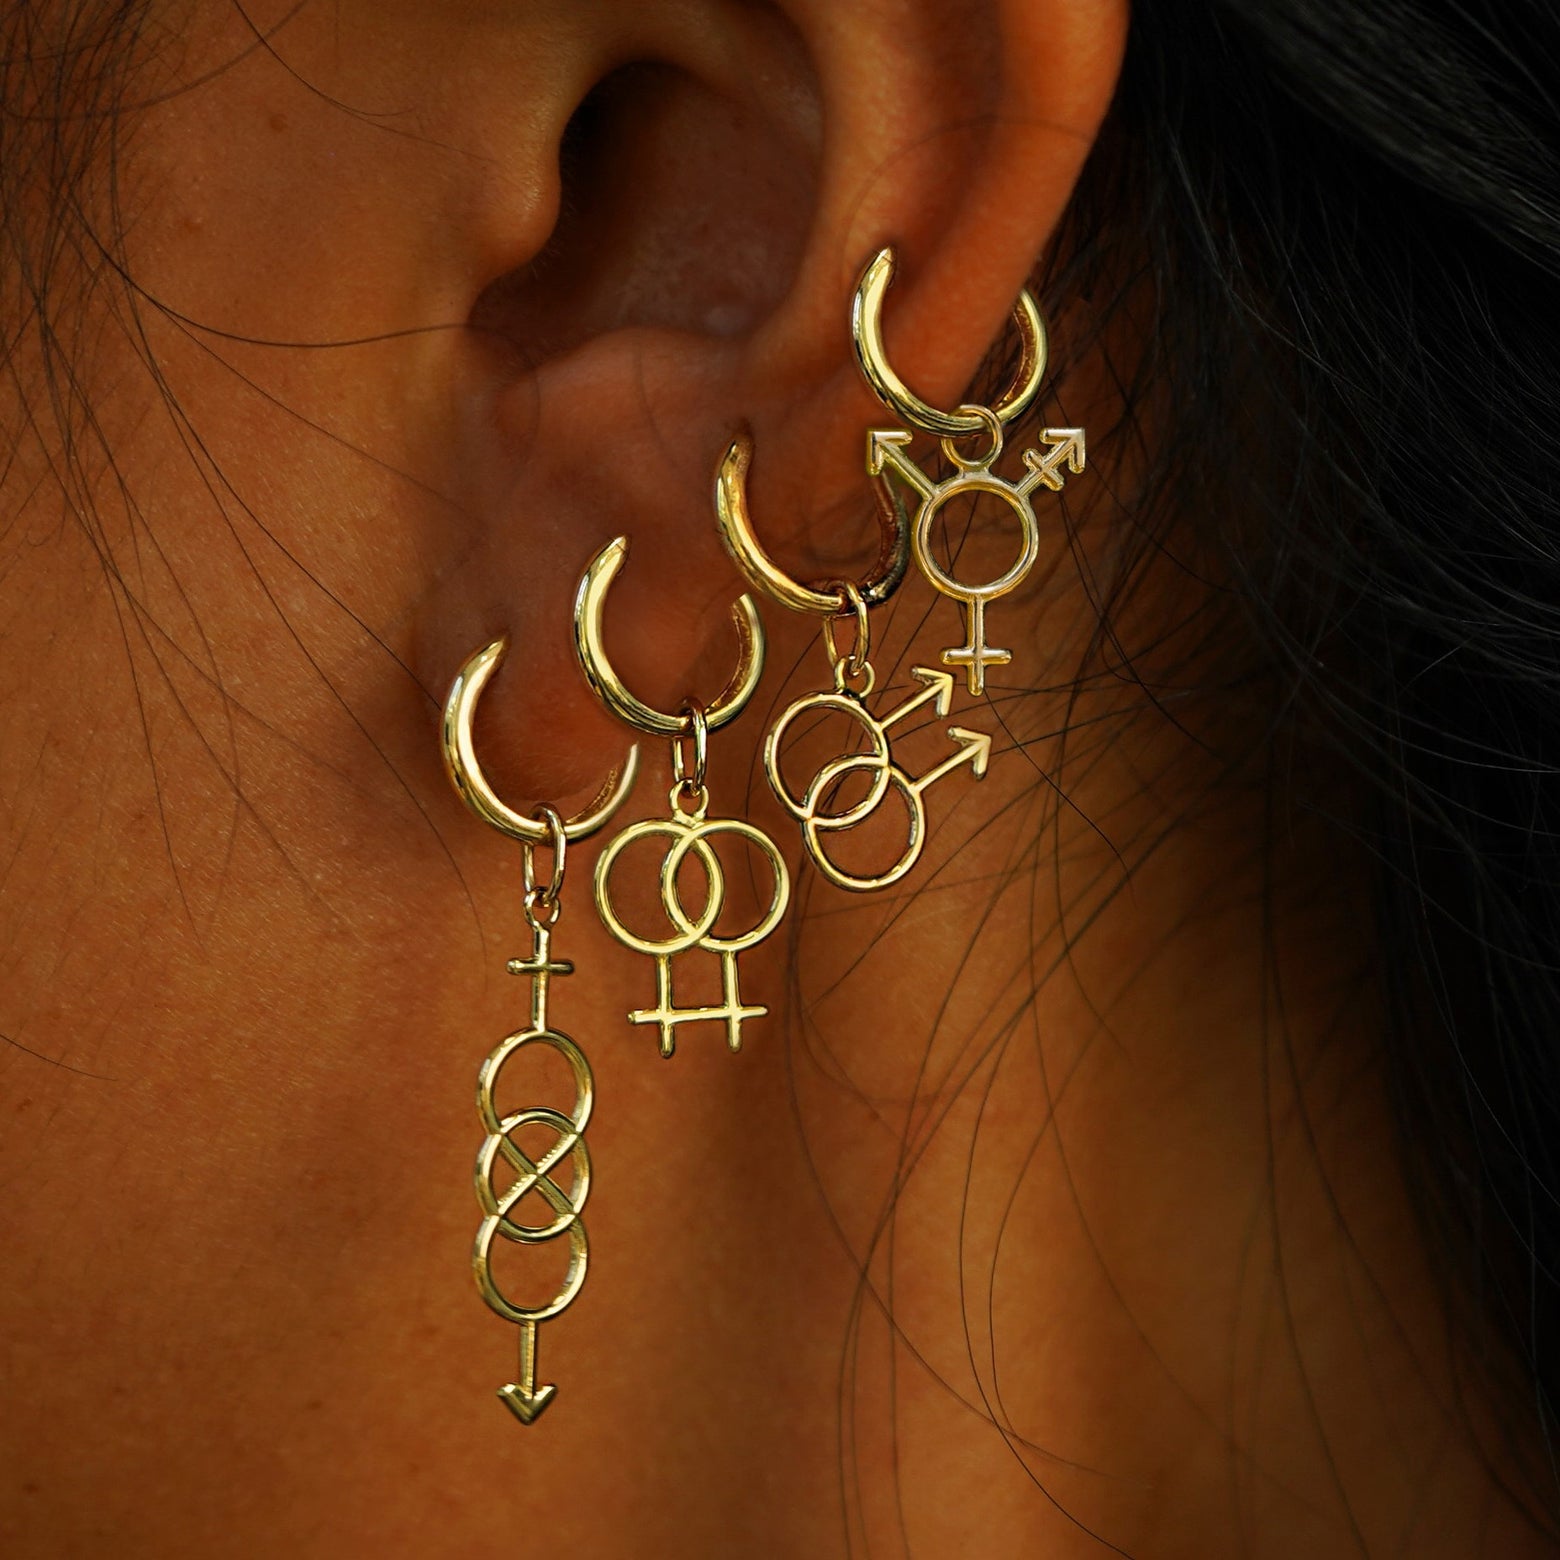 A model's ear wearing yellow gold Lesbian, Bisexual, and Gay symbol charms on three different Medium Curvy Huggies